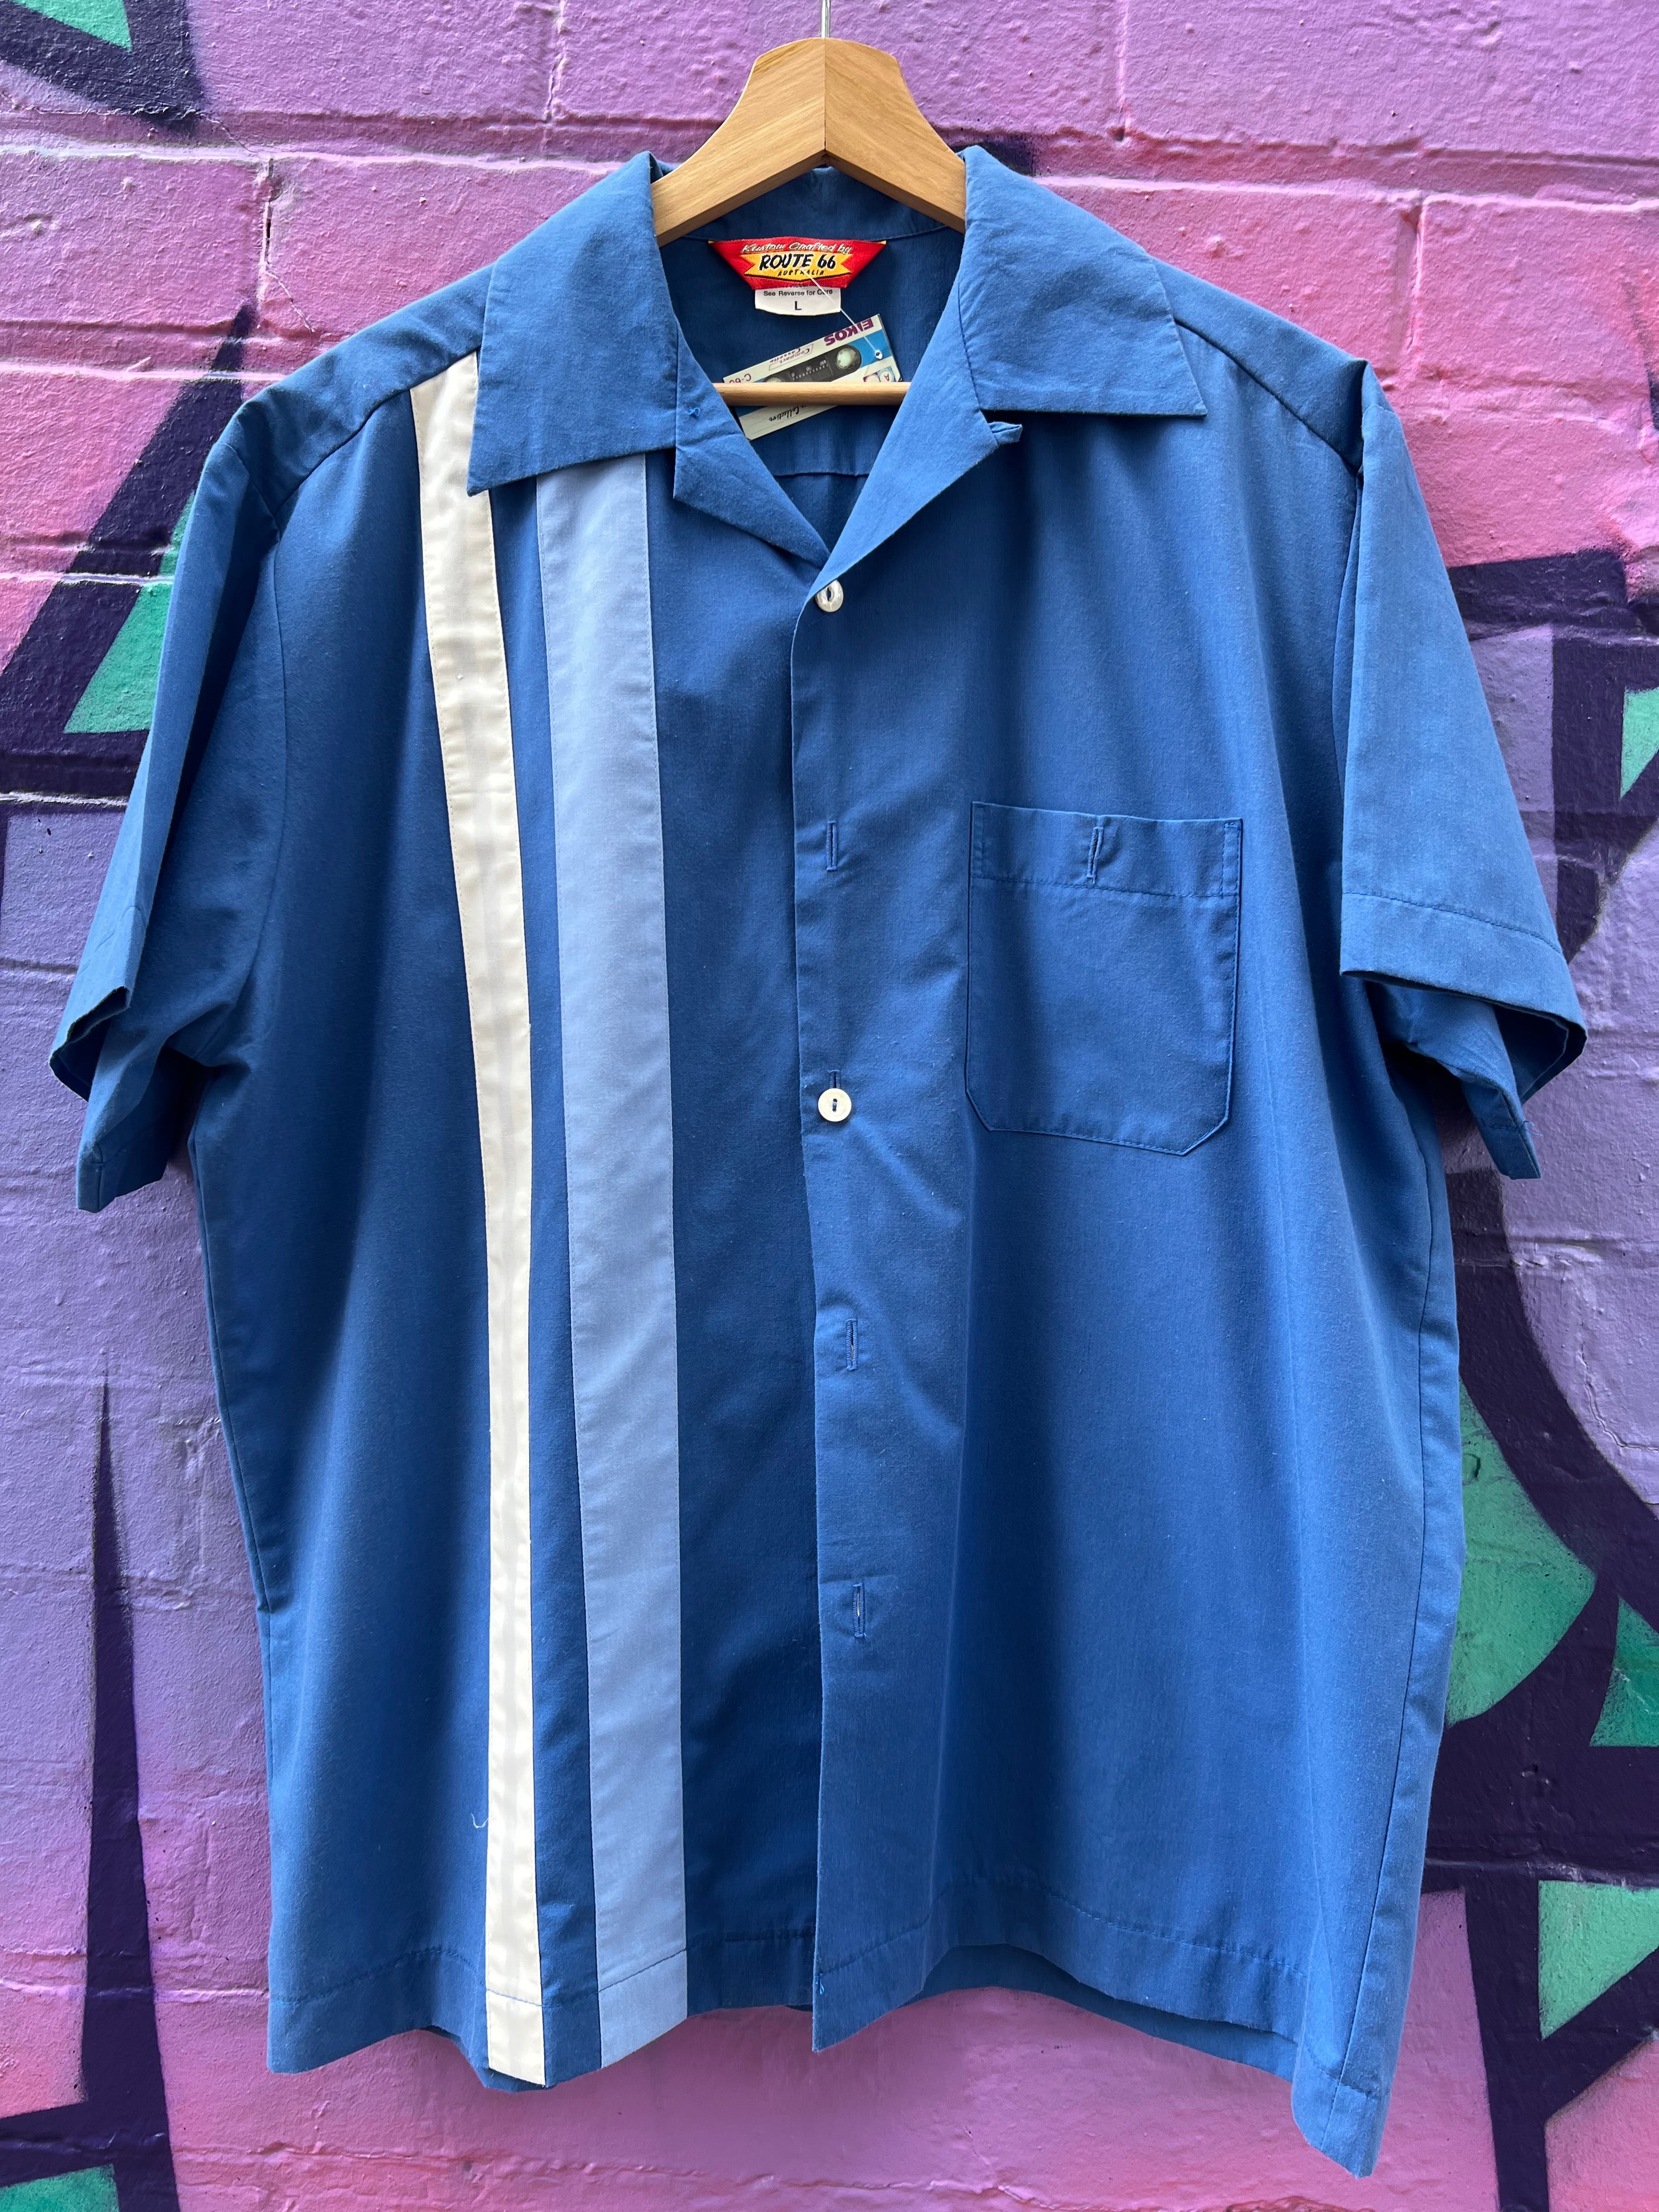 L - Route 66 Blue Bowling Button Up SS